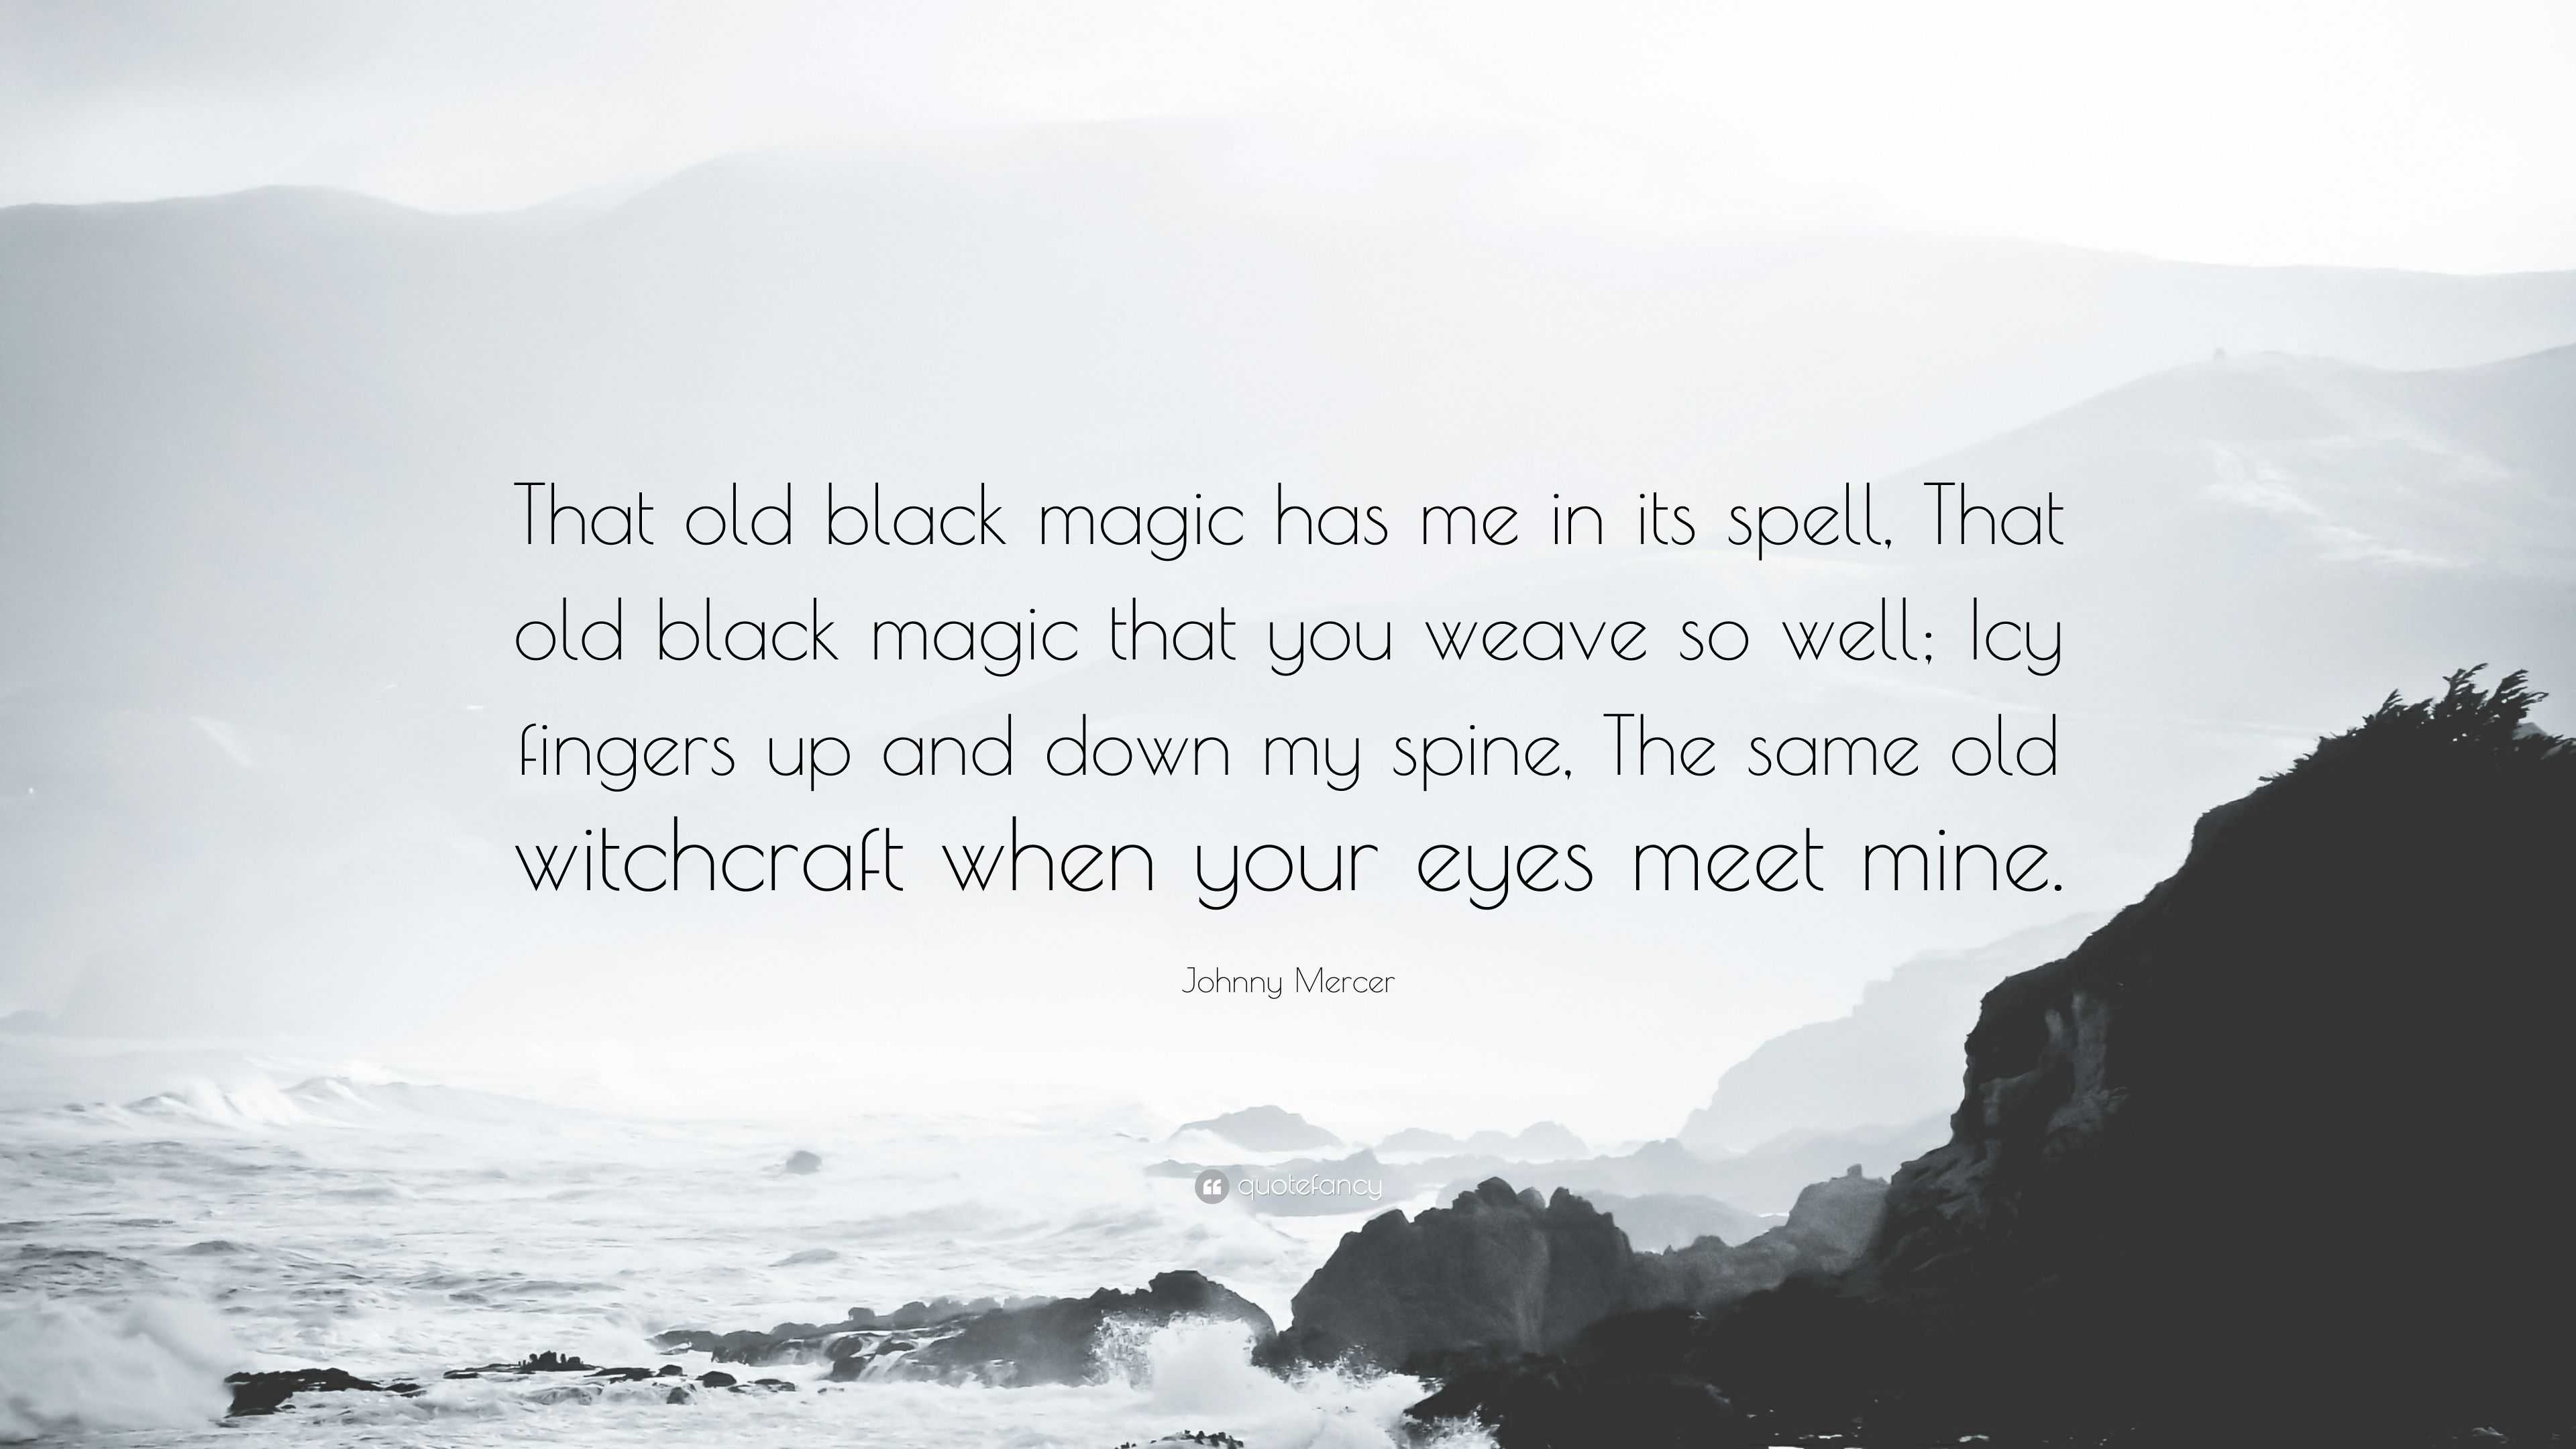 Johnny Mercer - That old black magic has me in its spell